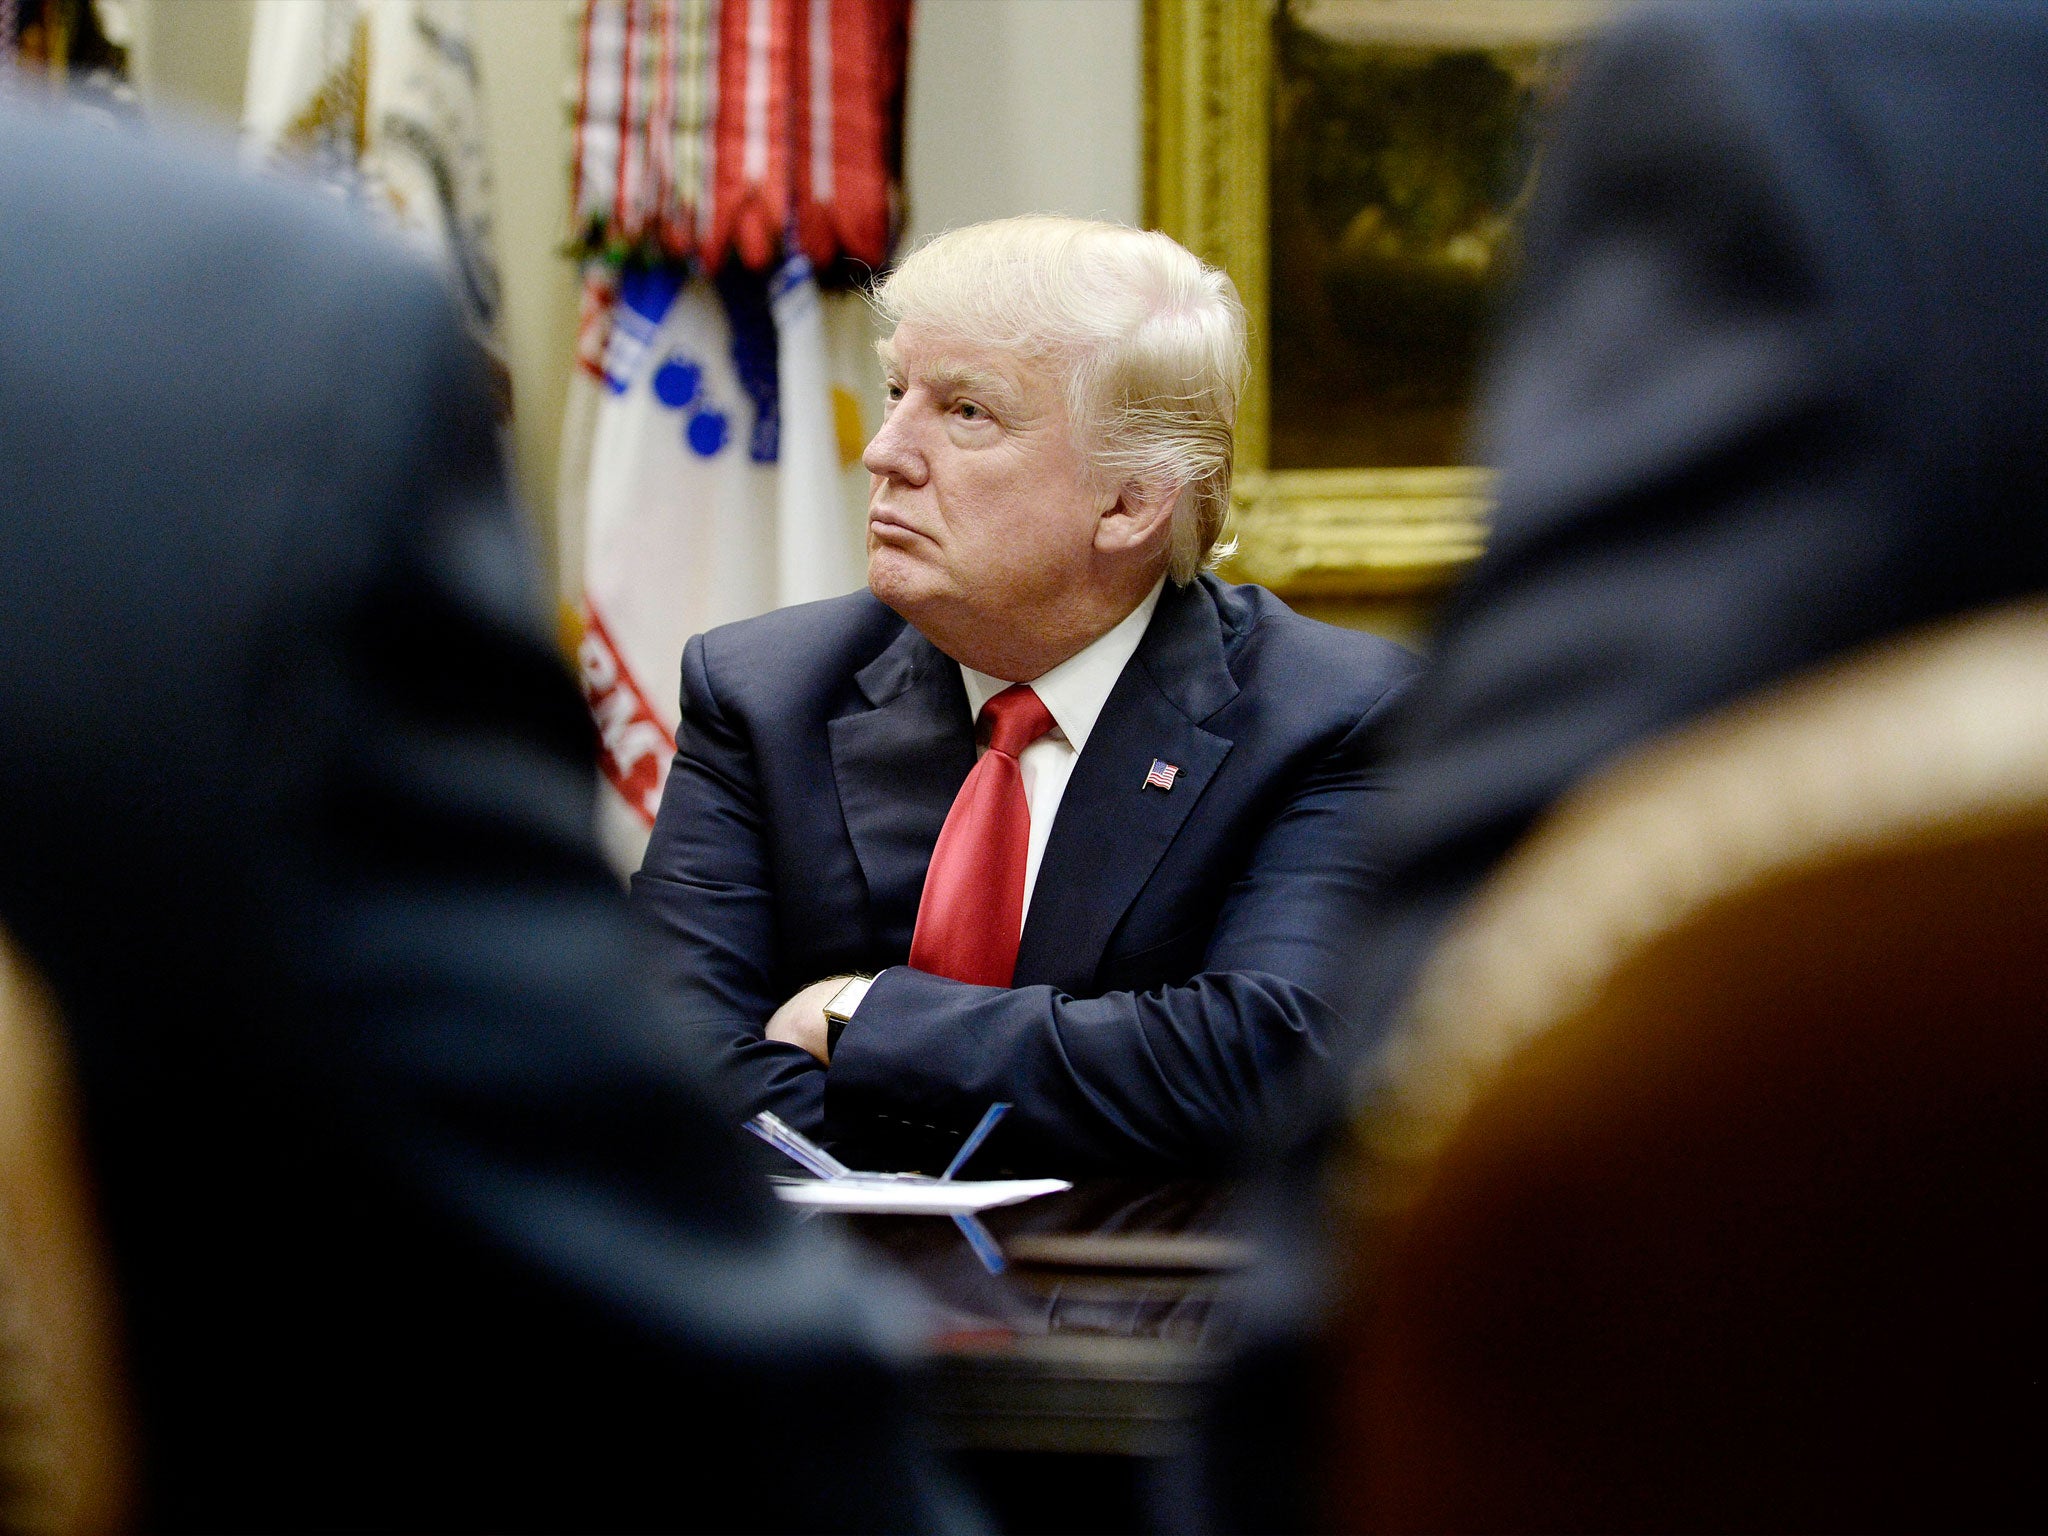 Donald Trump looks on during a meeting in the Roosevelt Room of the White House